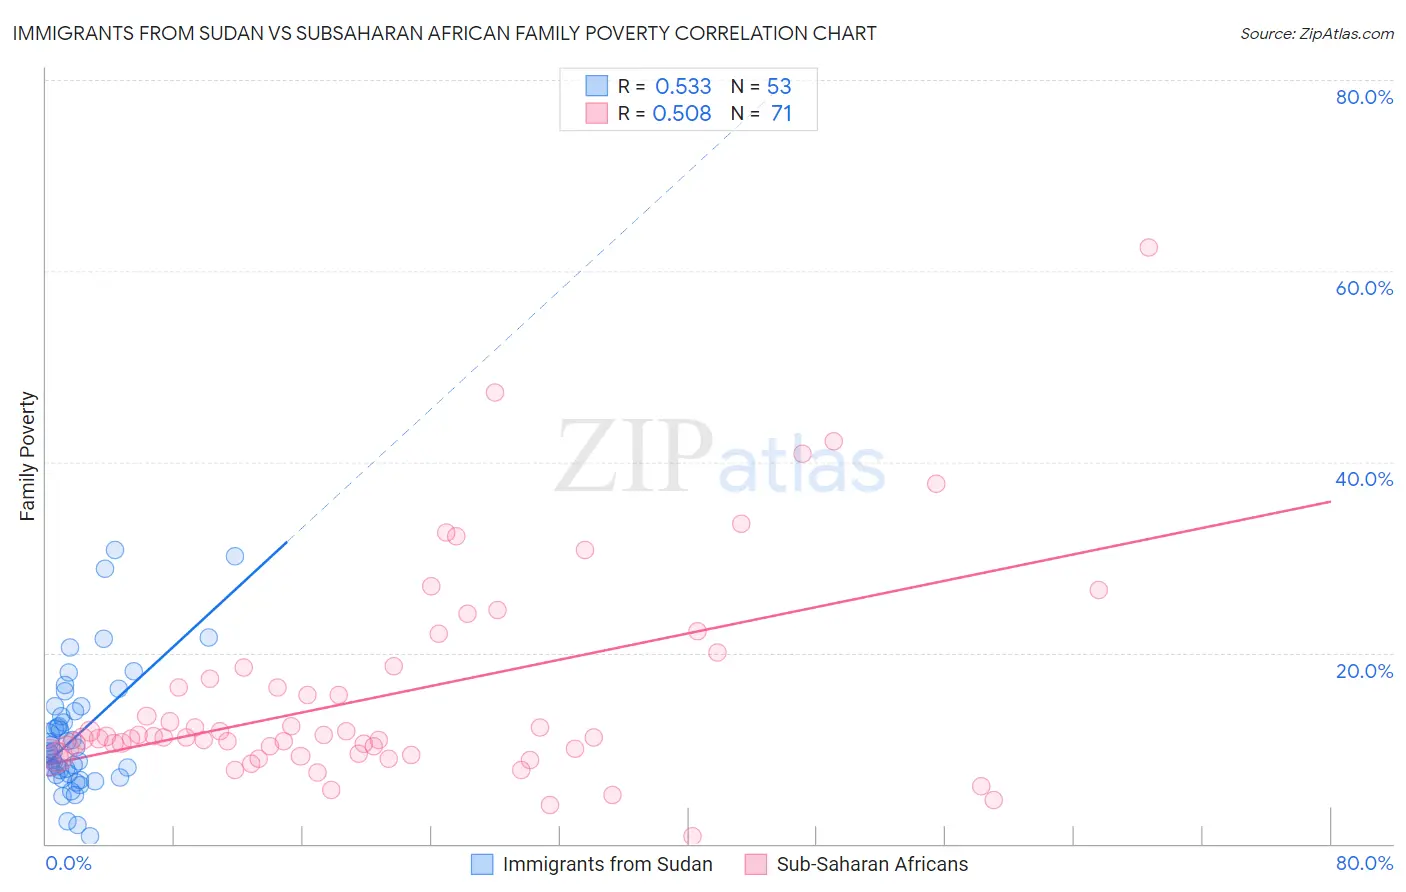 Immigrants from Sudan vs Subsaharan African Family Poverty